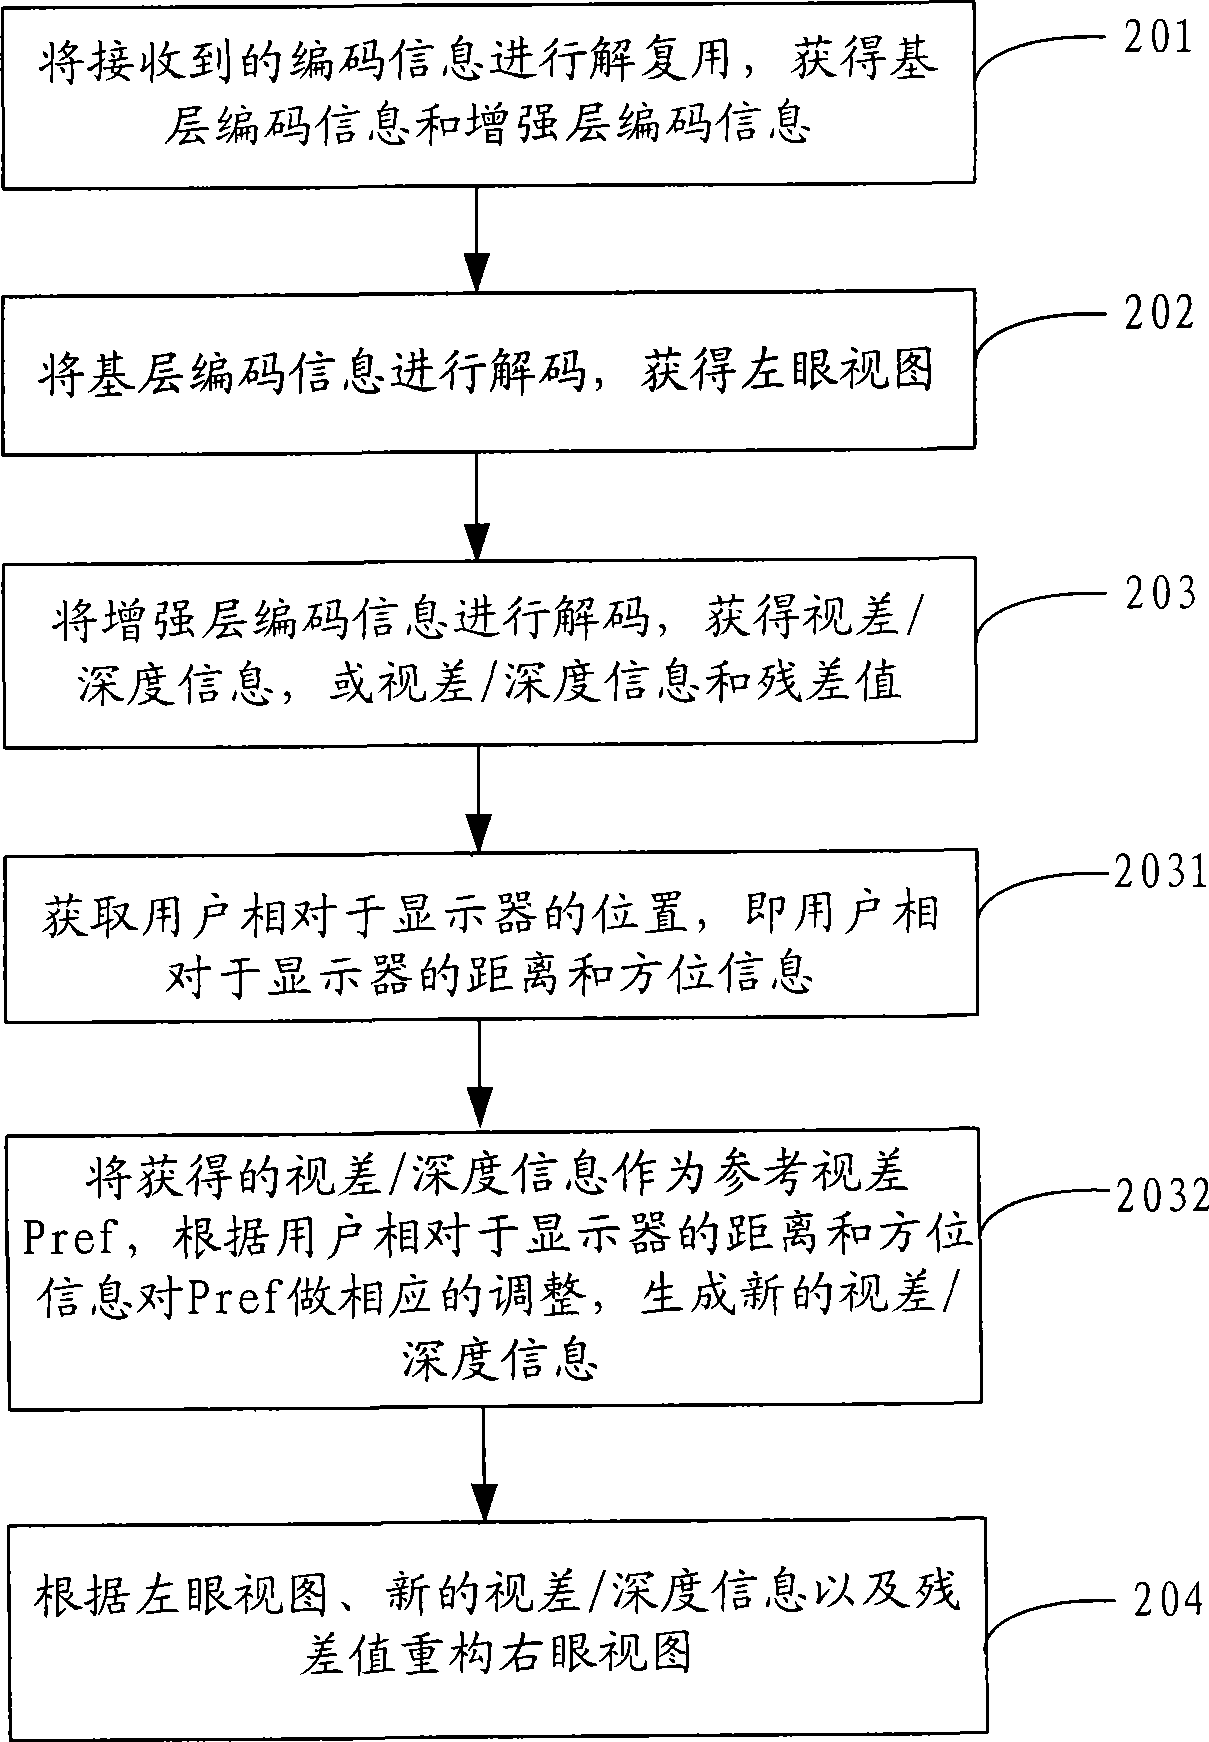 Method and apparatus for encoding and decoding video, and video encoder and decoder